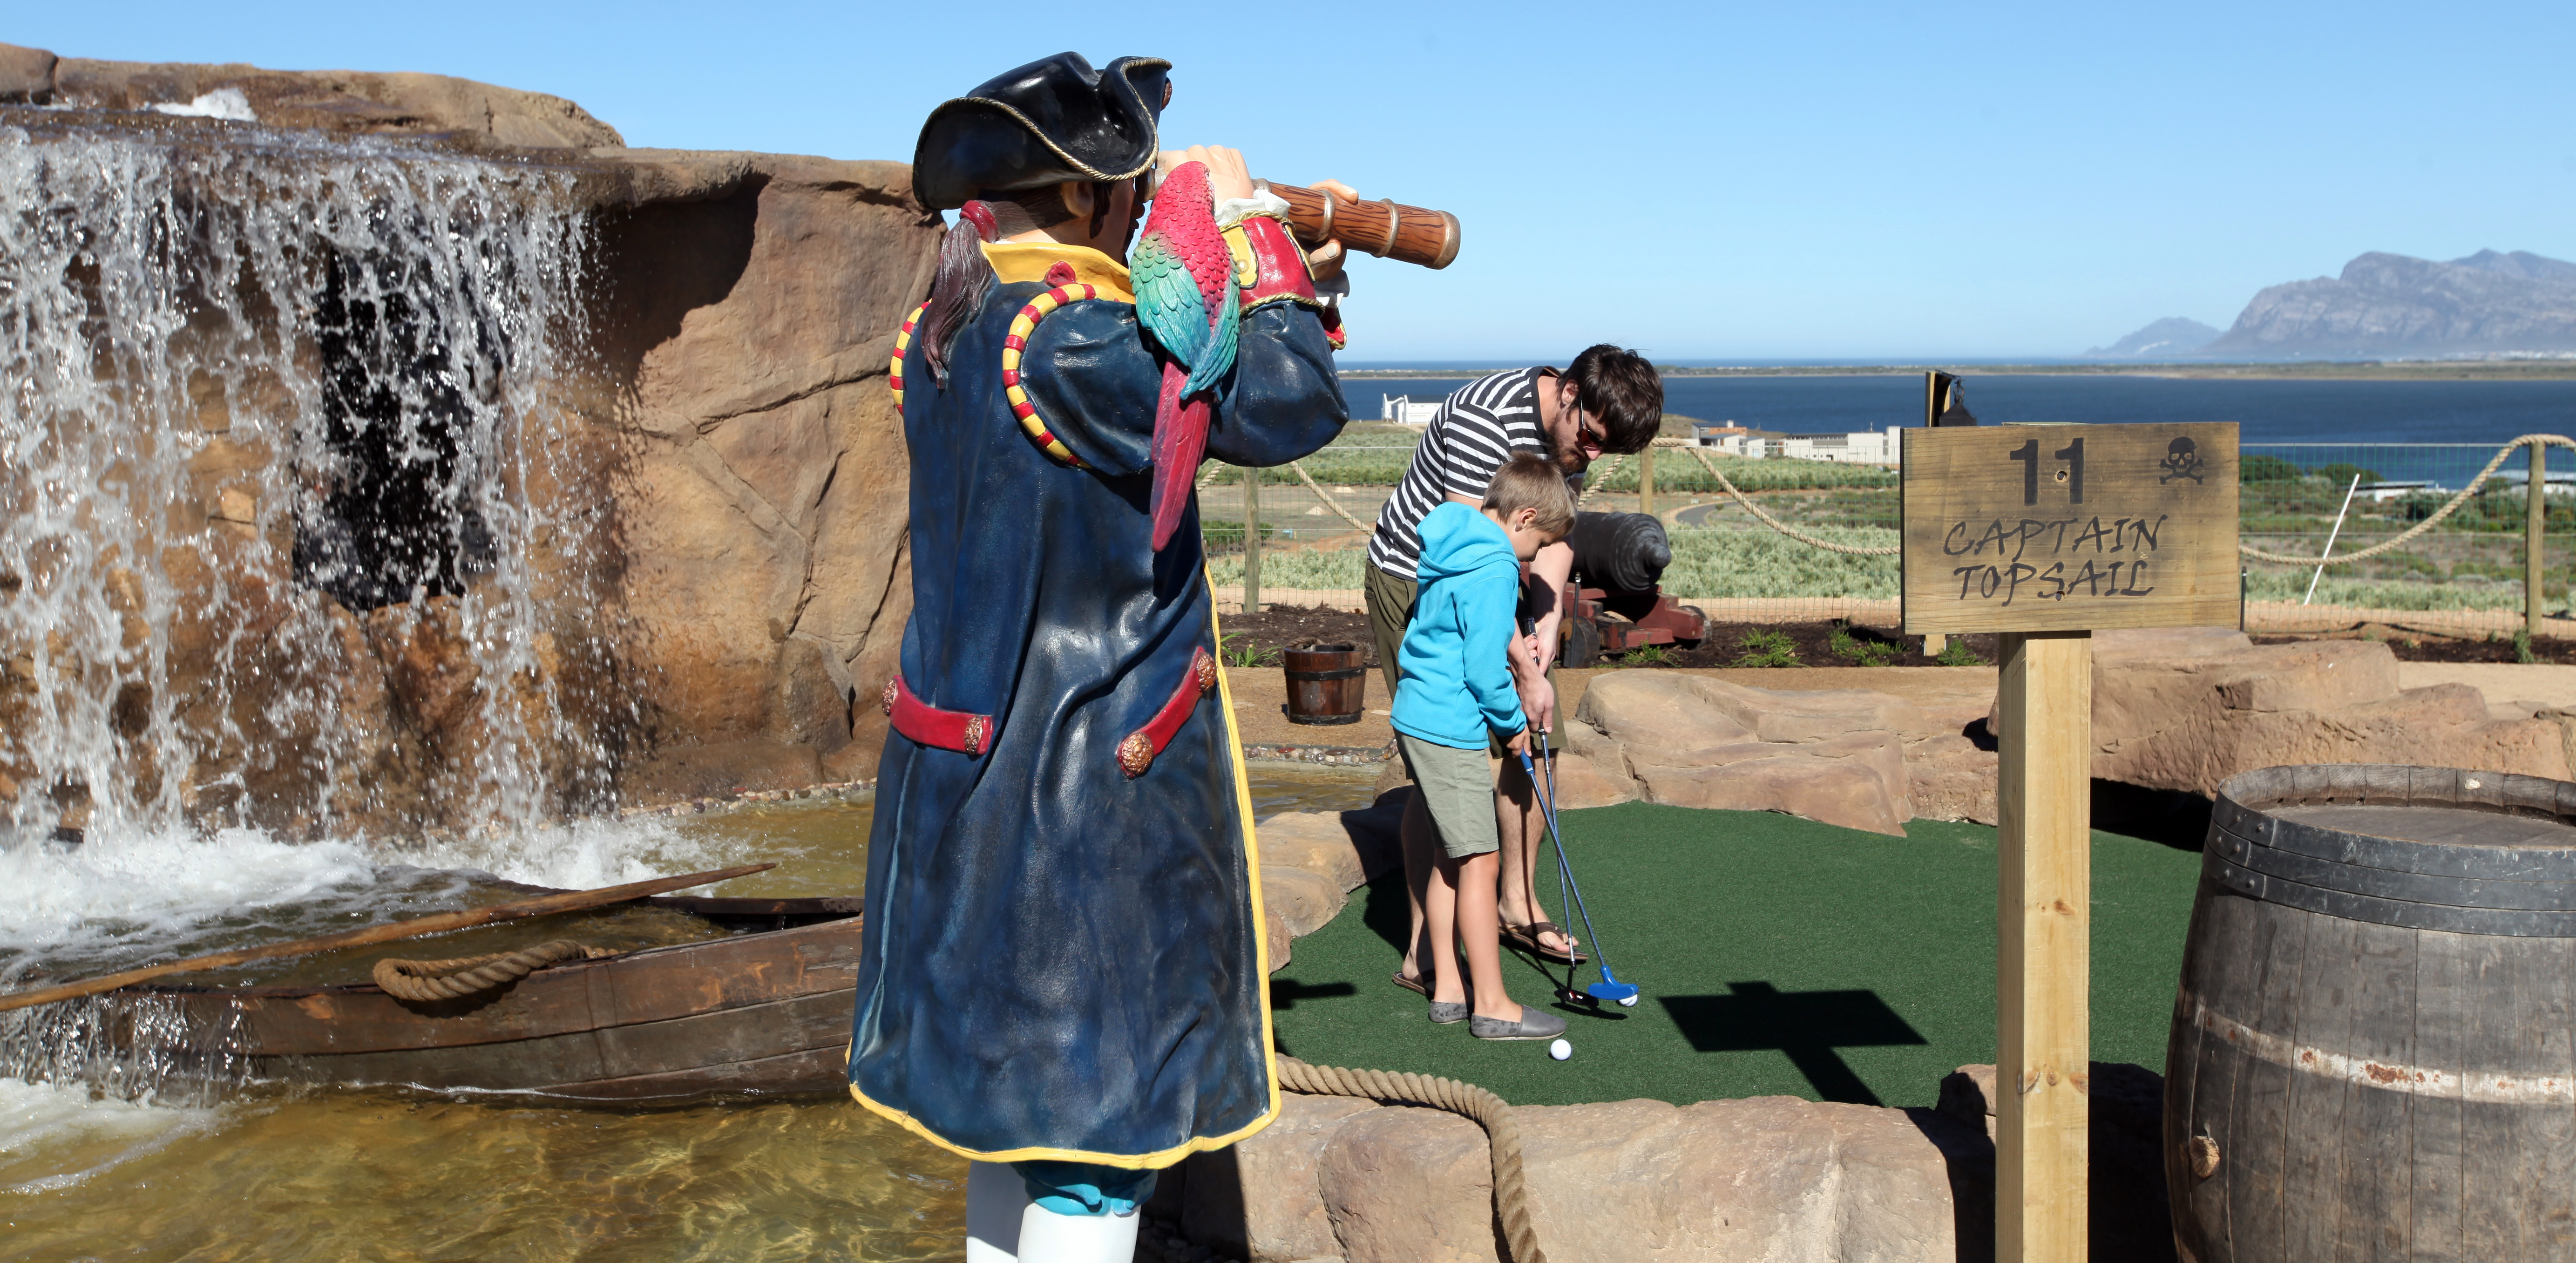 WIN a Family Day of FUN at Pirate Adventure Golf and Splash Pad @BenguelaCove